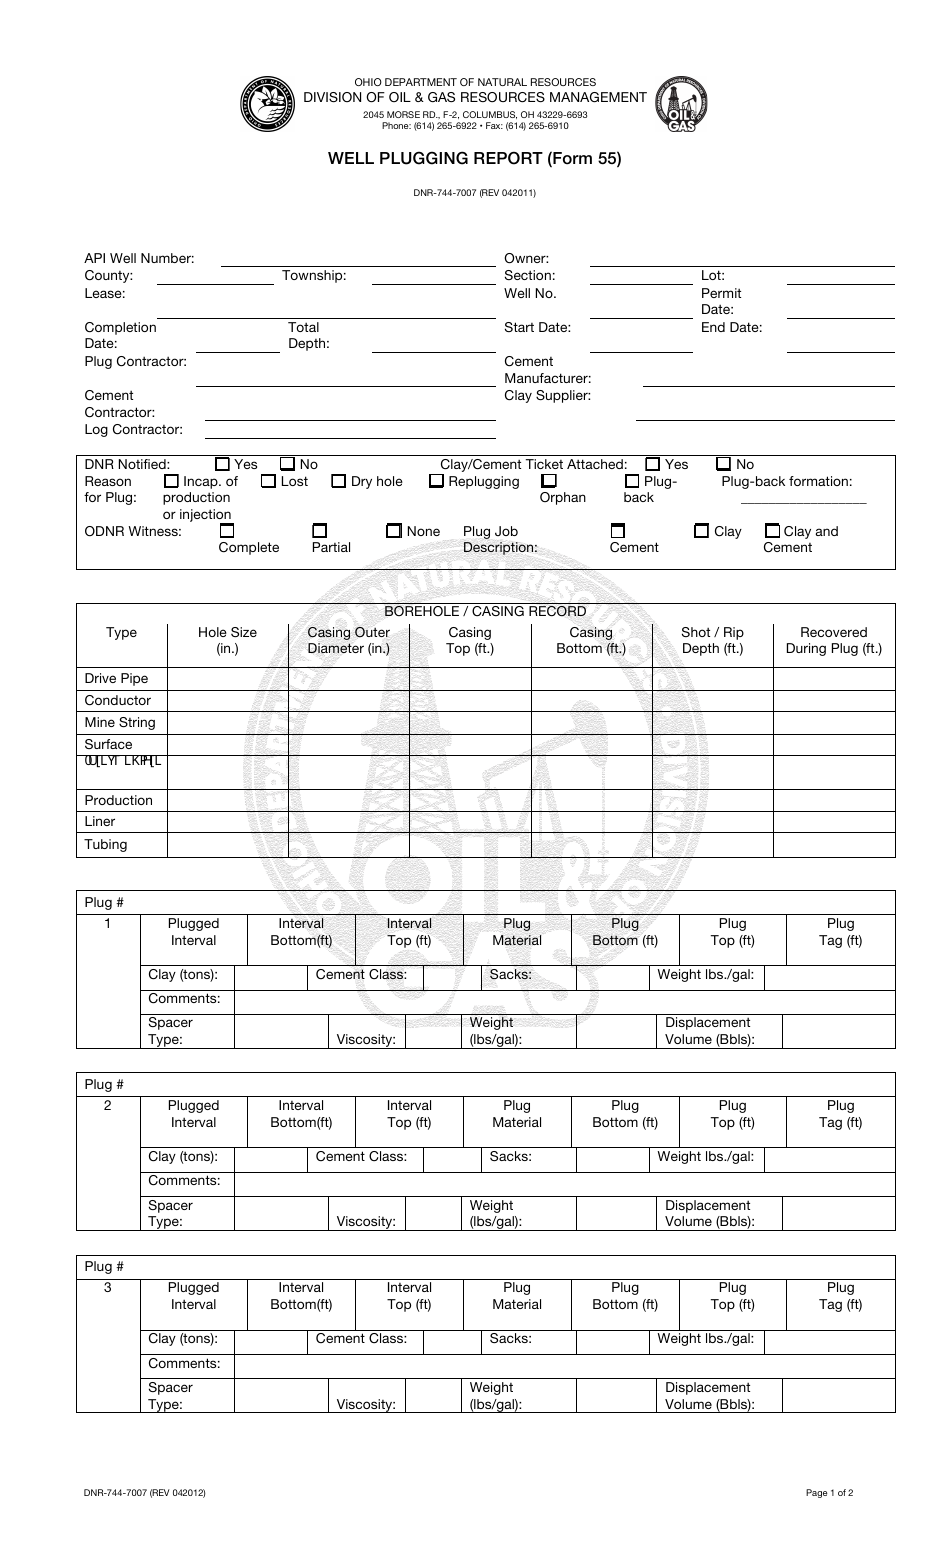 Form 55 (DNR-744-7007) Well Plugging Report - Ohio, Page 1